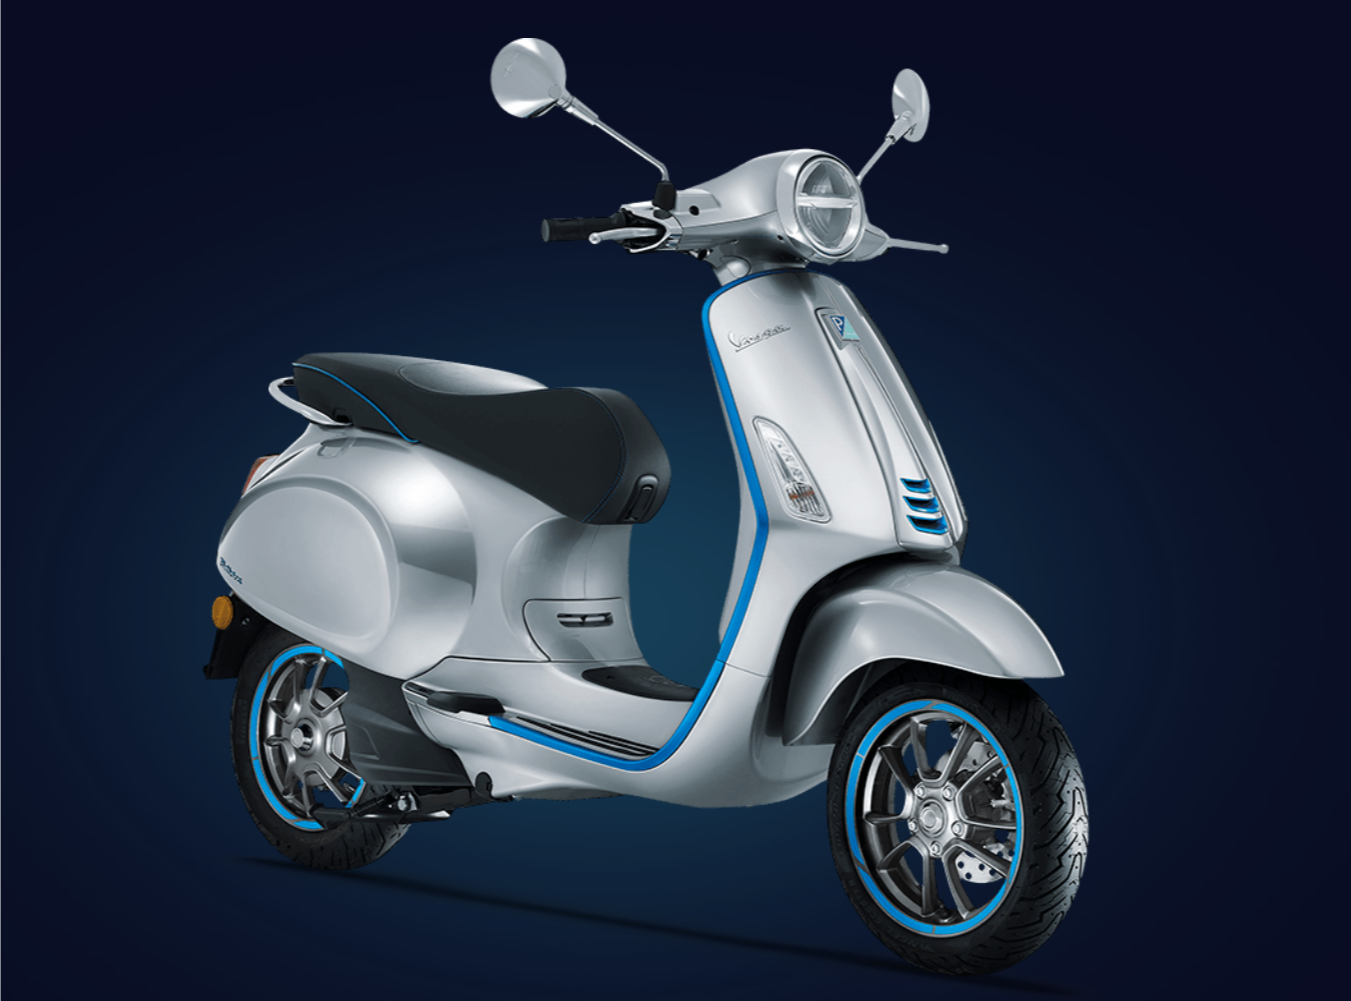 The electric Vespa of your dreams will soon be available for US $7000 ...